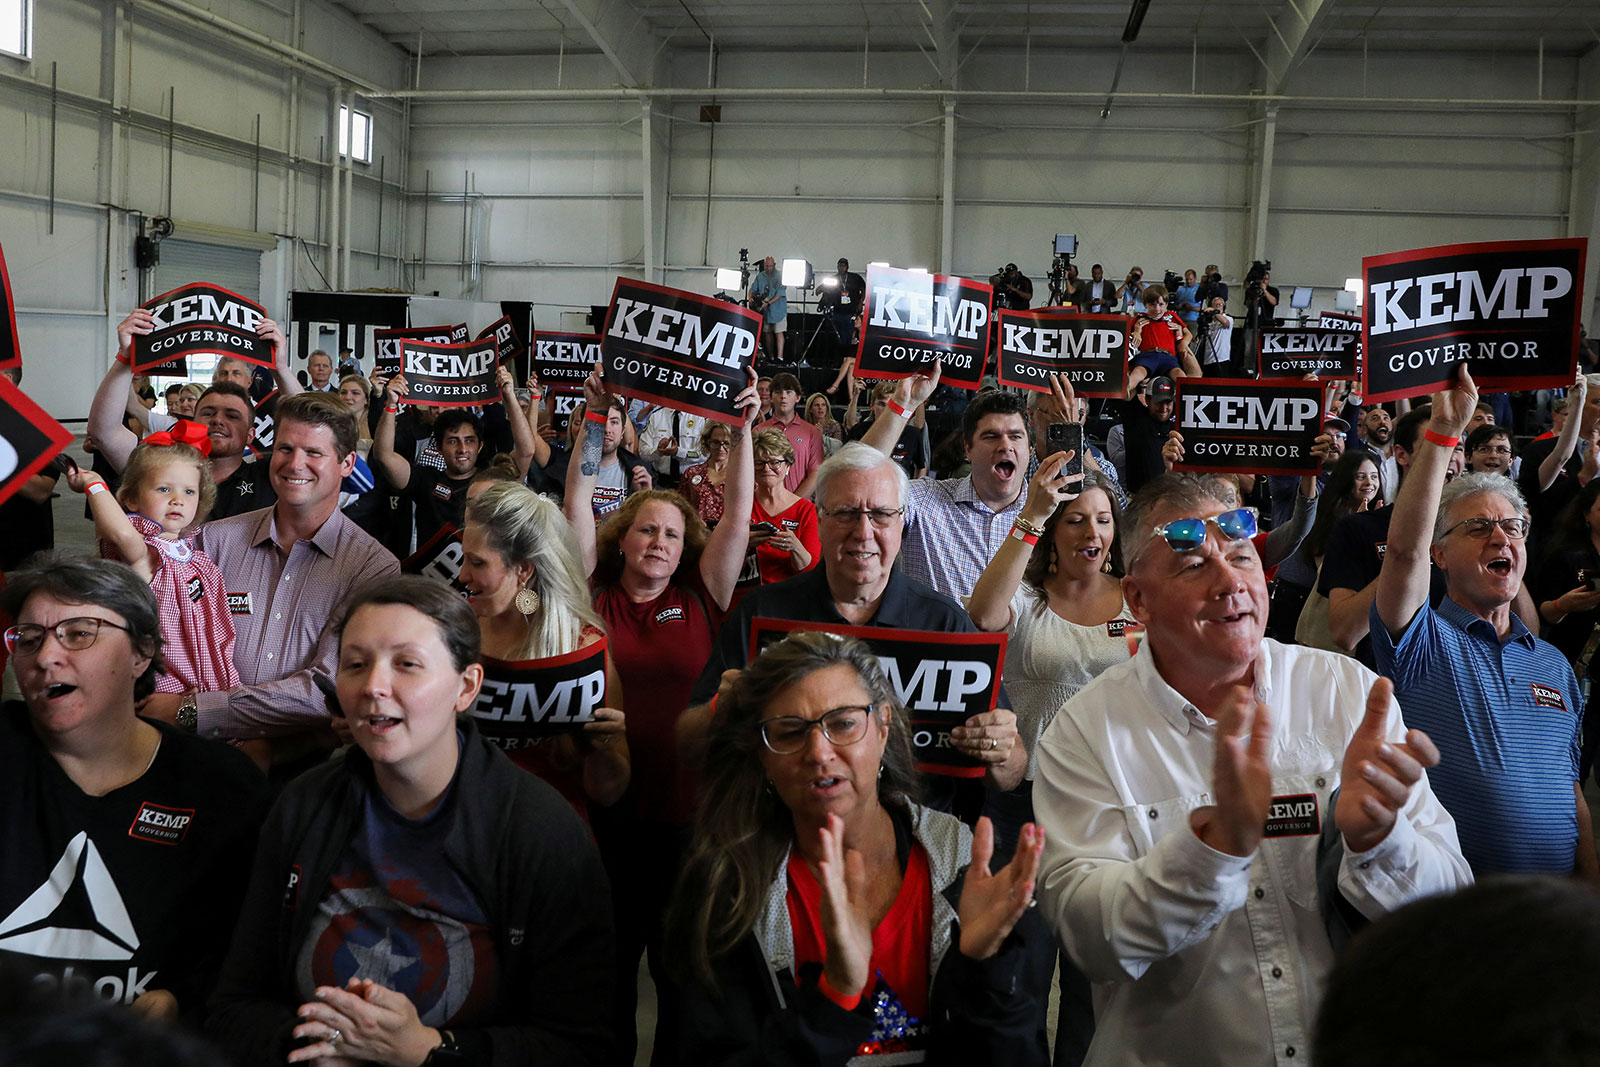 People attend a rally for Georgia Gov. Brian Kemp ahead of the state's primary election in Kennesaw, Georgia, on May 23.